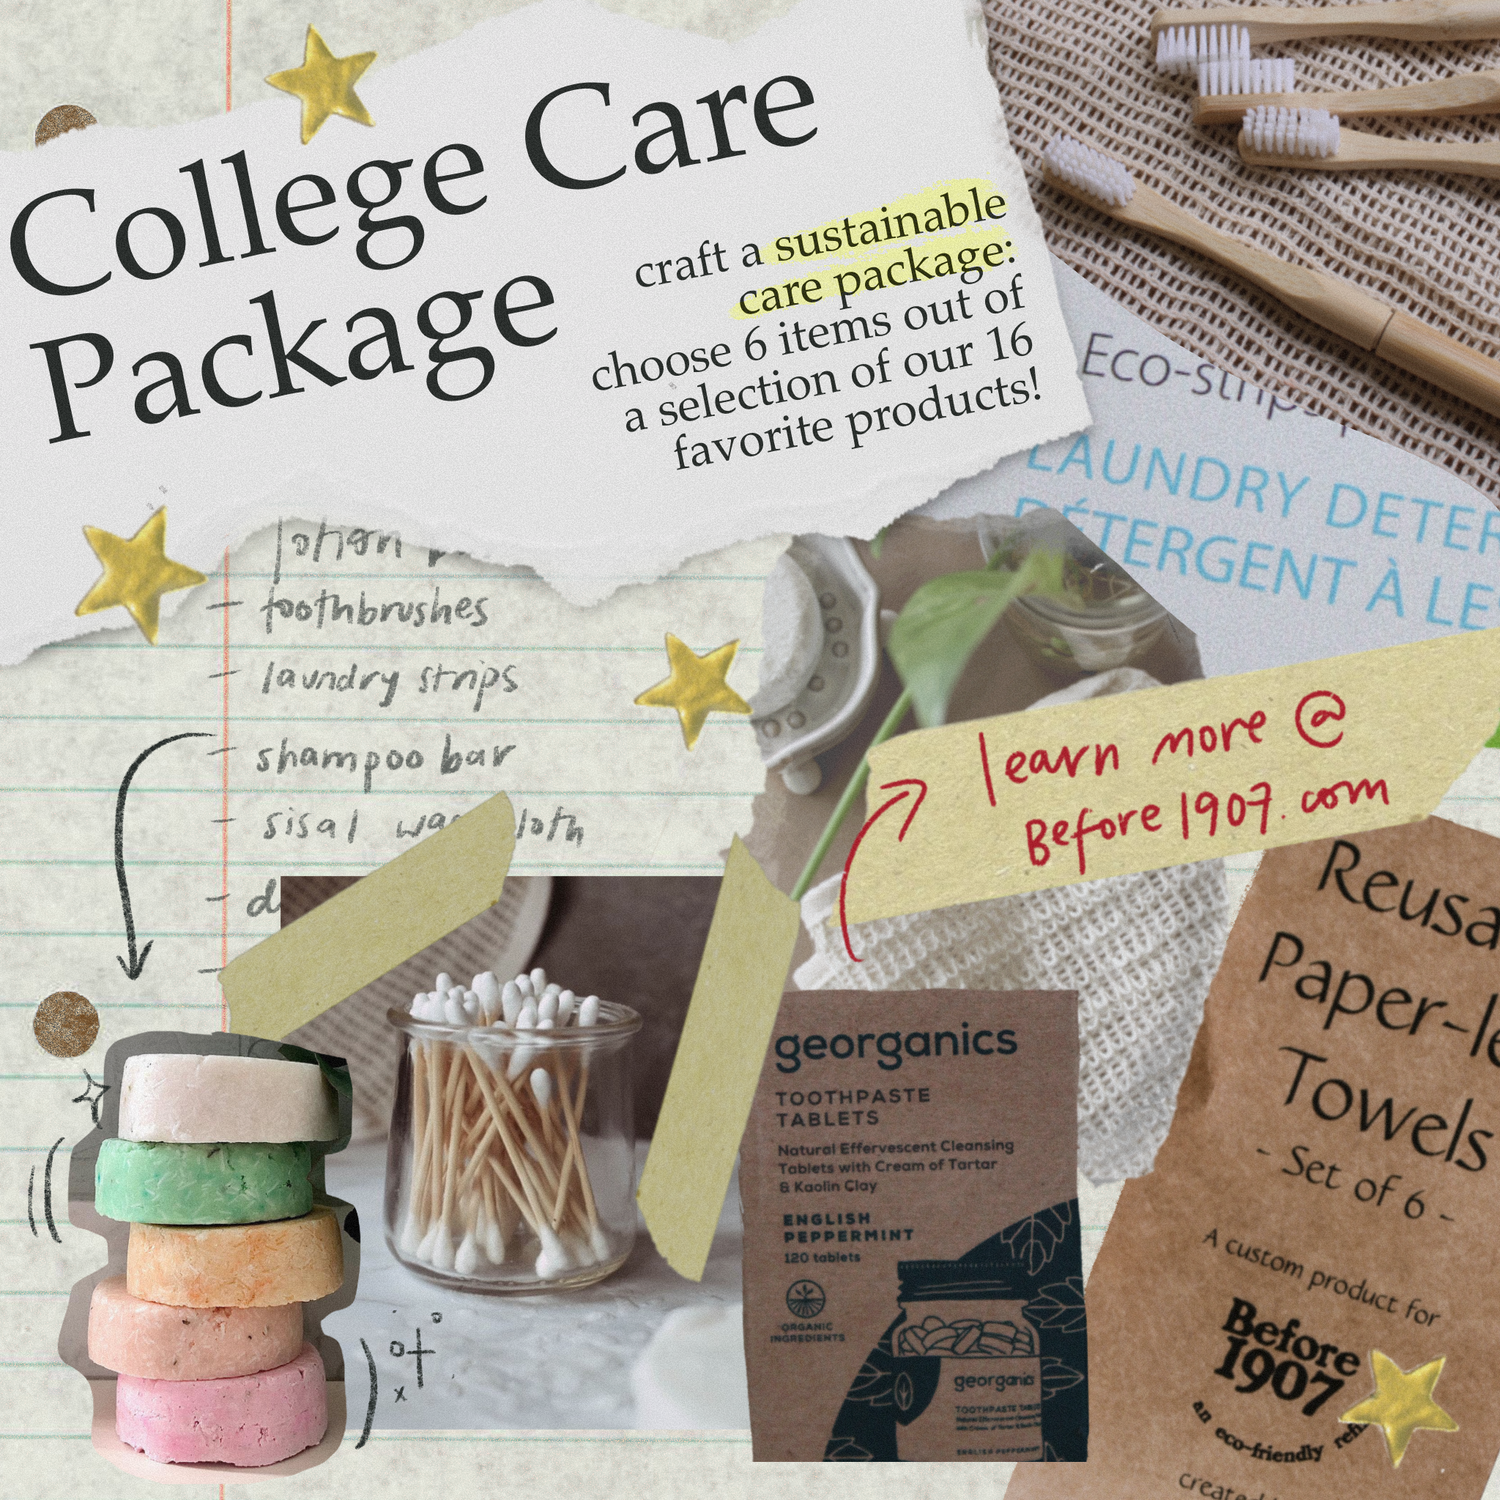 College Care Package (3 Products)